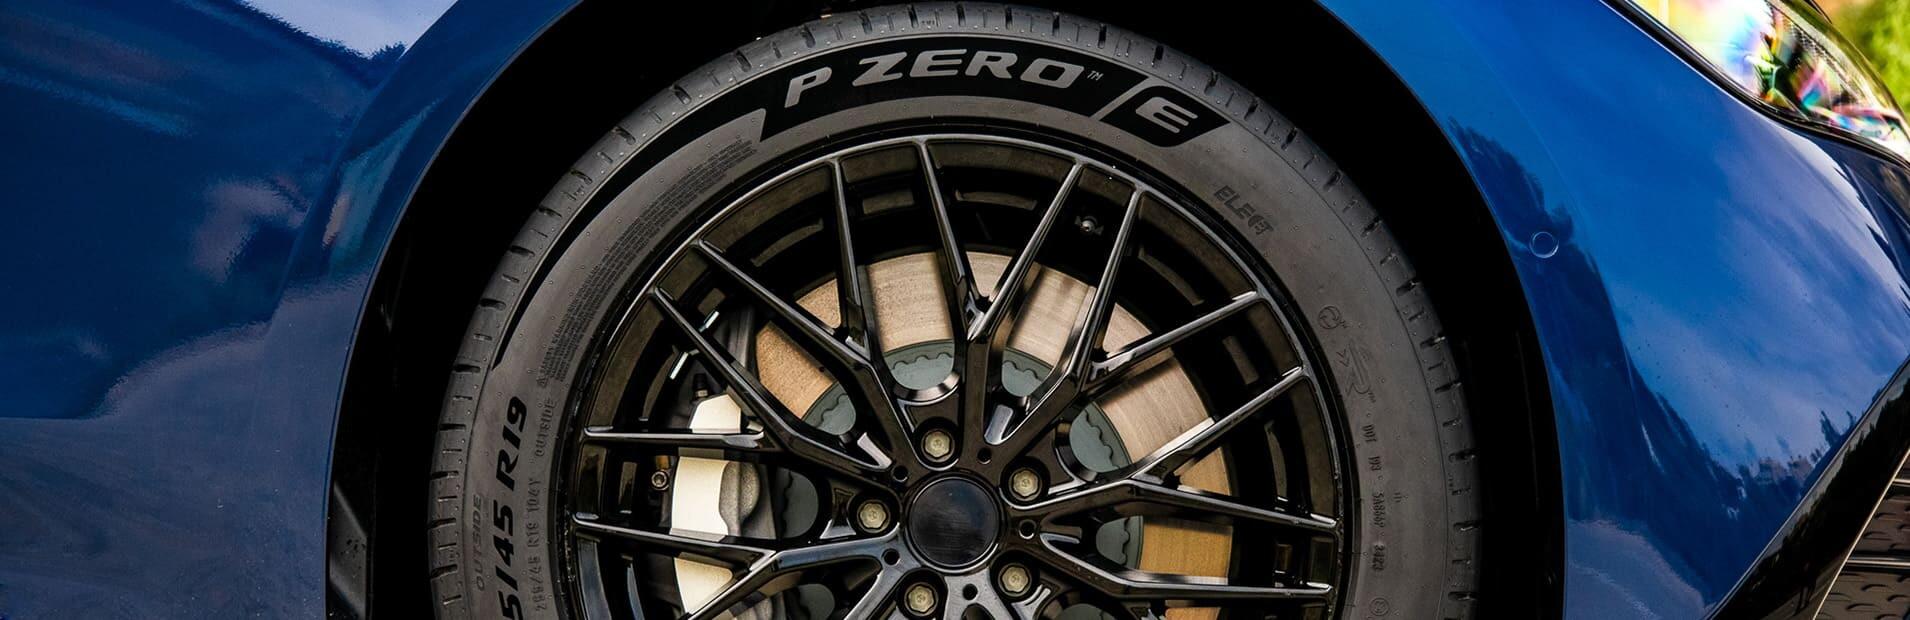 Pirelli launches logo for the most sustainable tyres